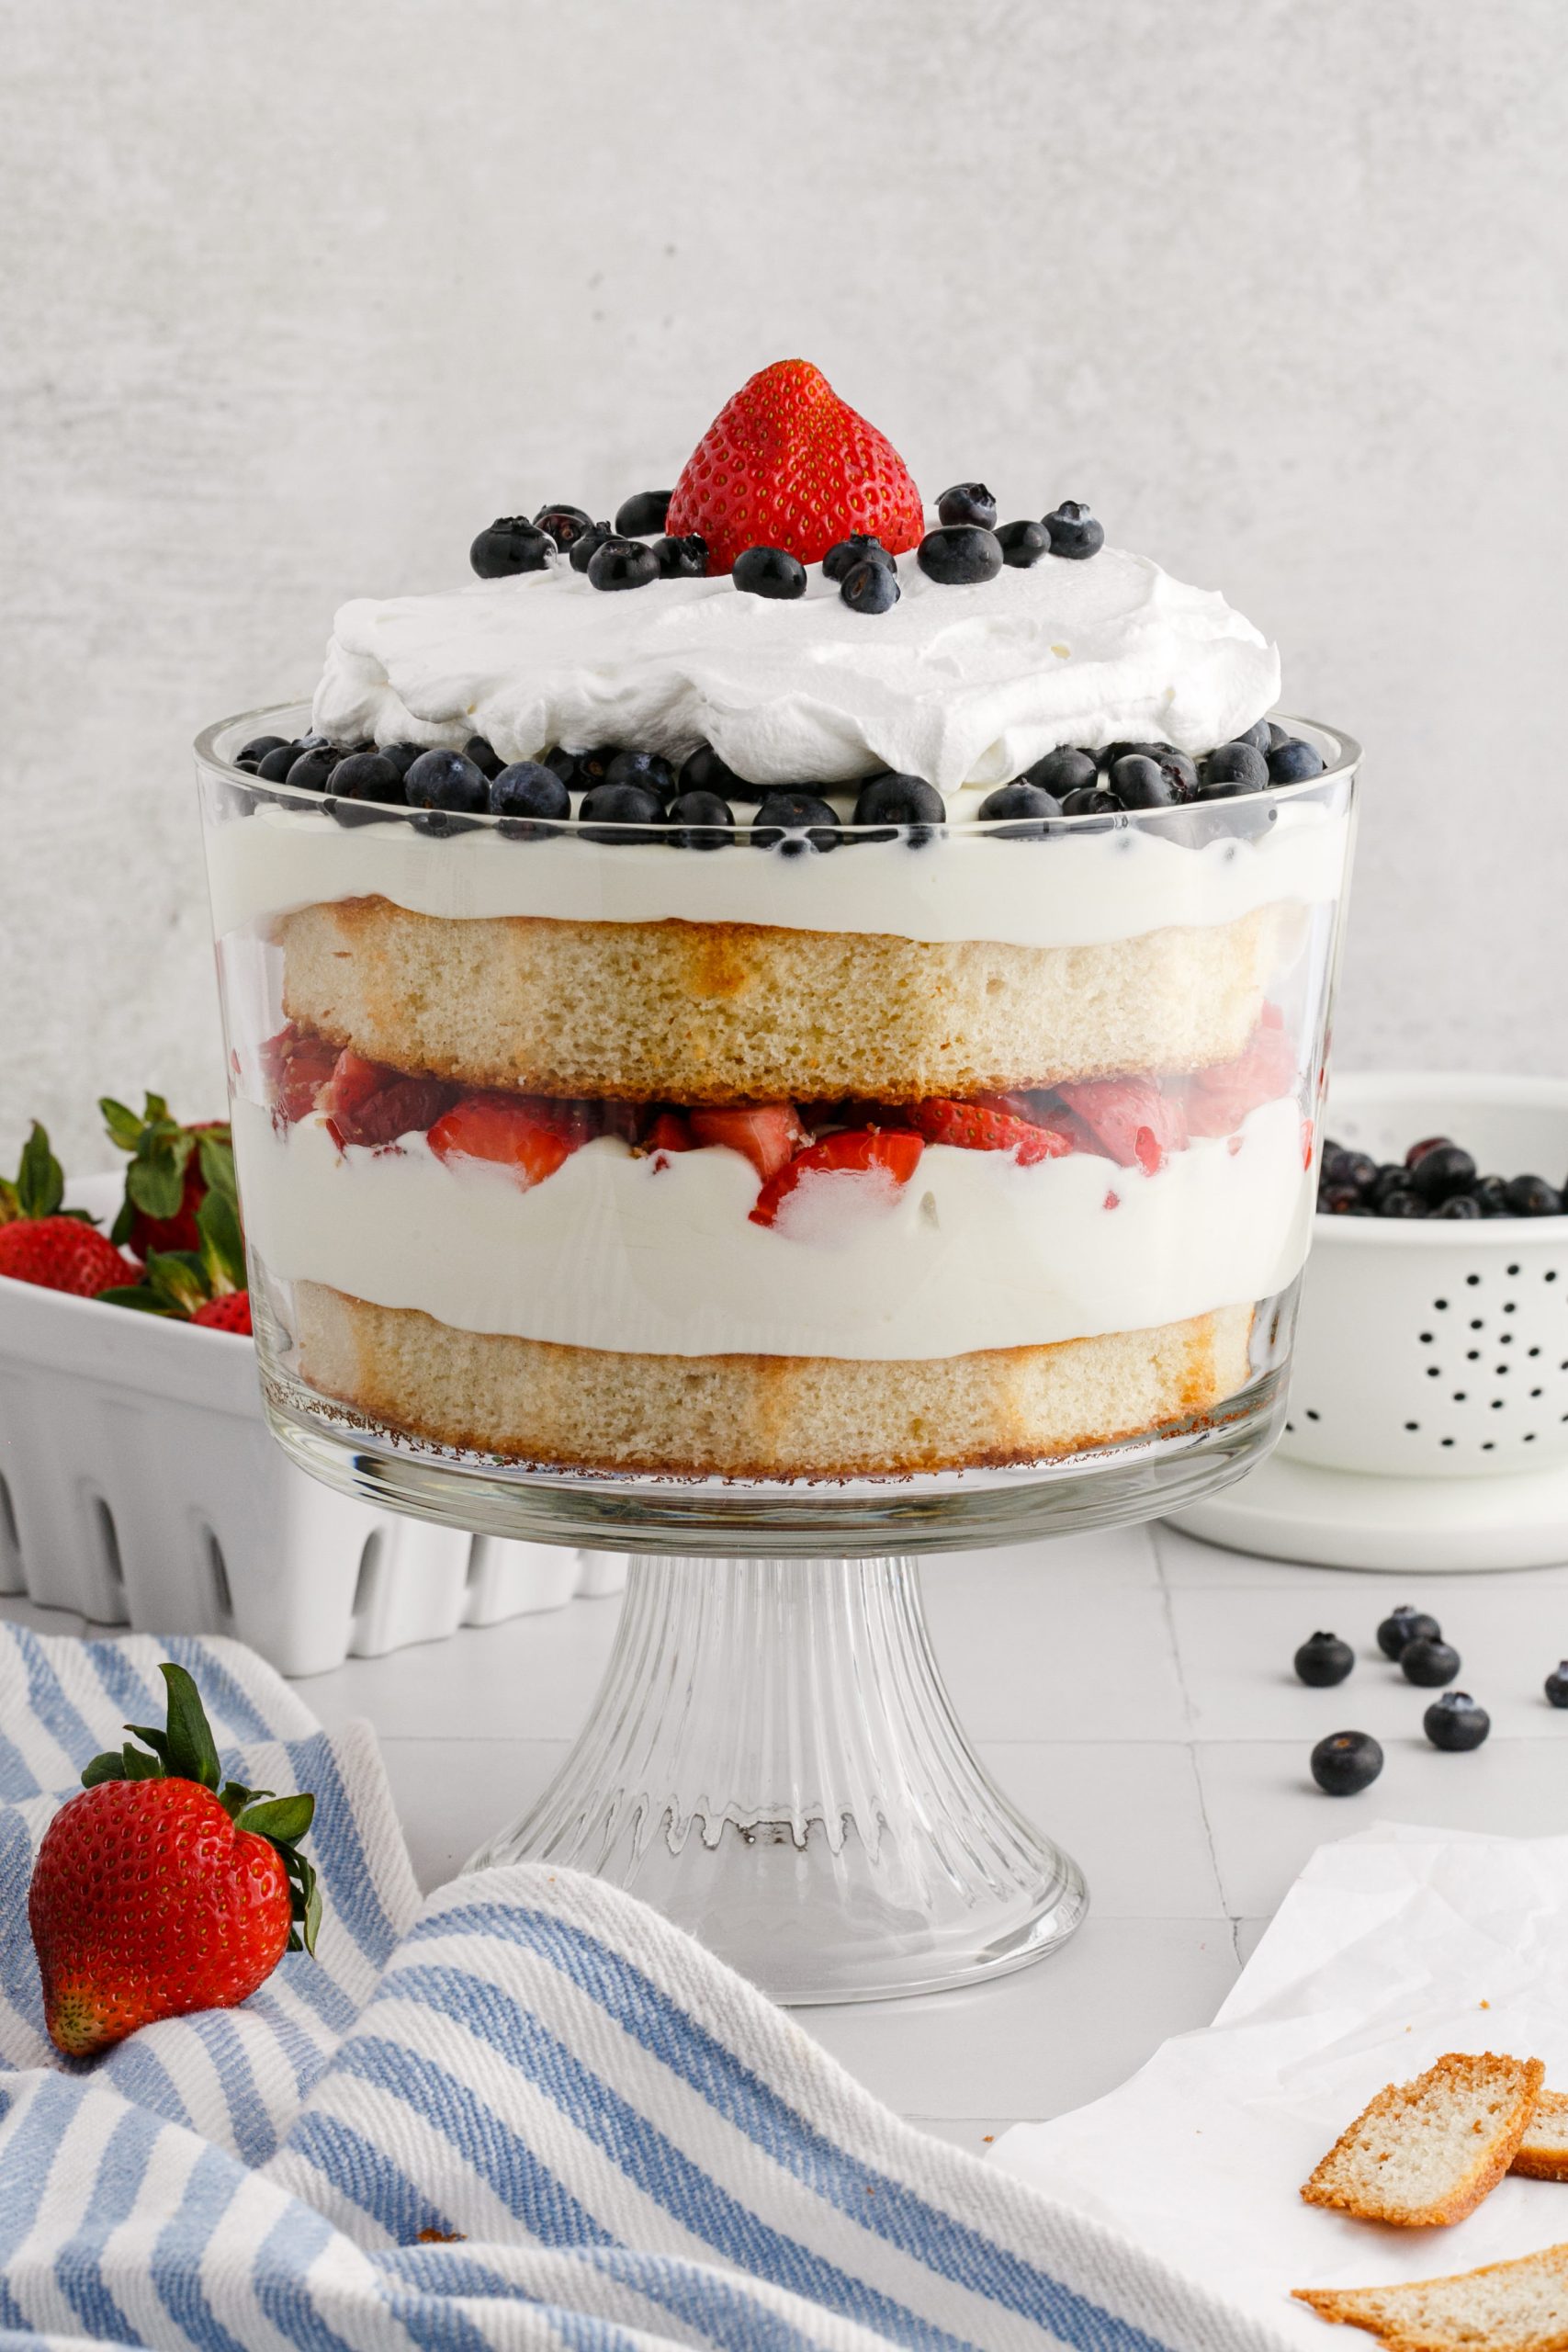 Celebrate patriotic holidays with this no bake dessert, a 4th of July Trifle. This easy red, white and blue dessert made with fresh berries, cake, pudding, and Cool Whip will be one of the highlights of the dessert table and is perfect for a summer party. via @foodhussy